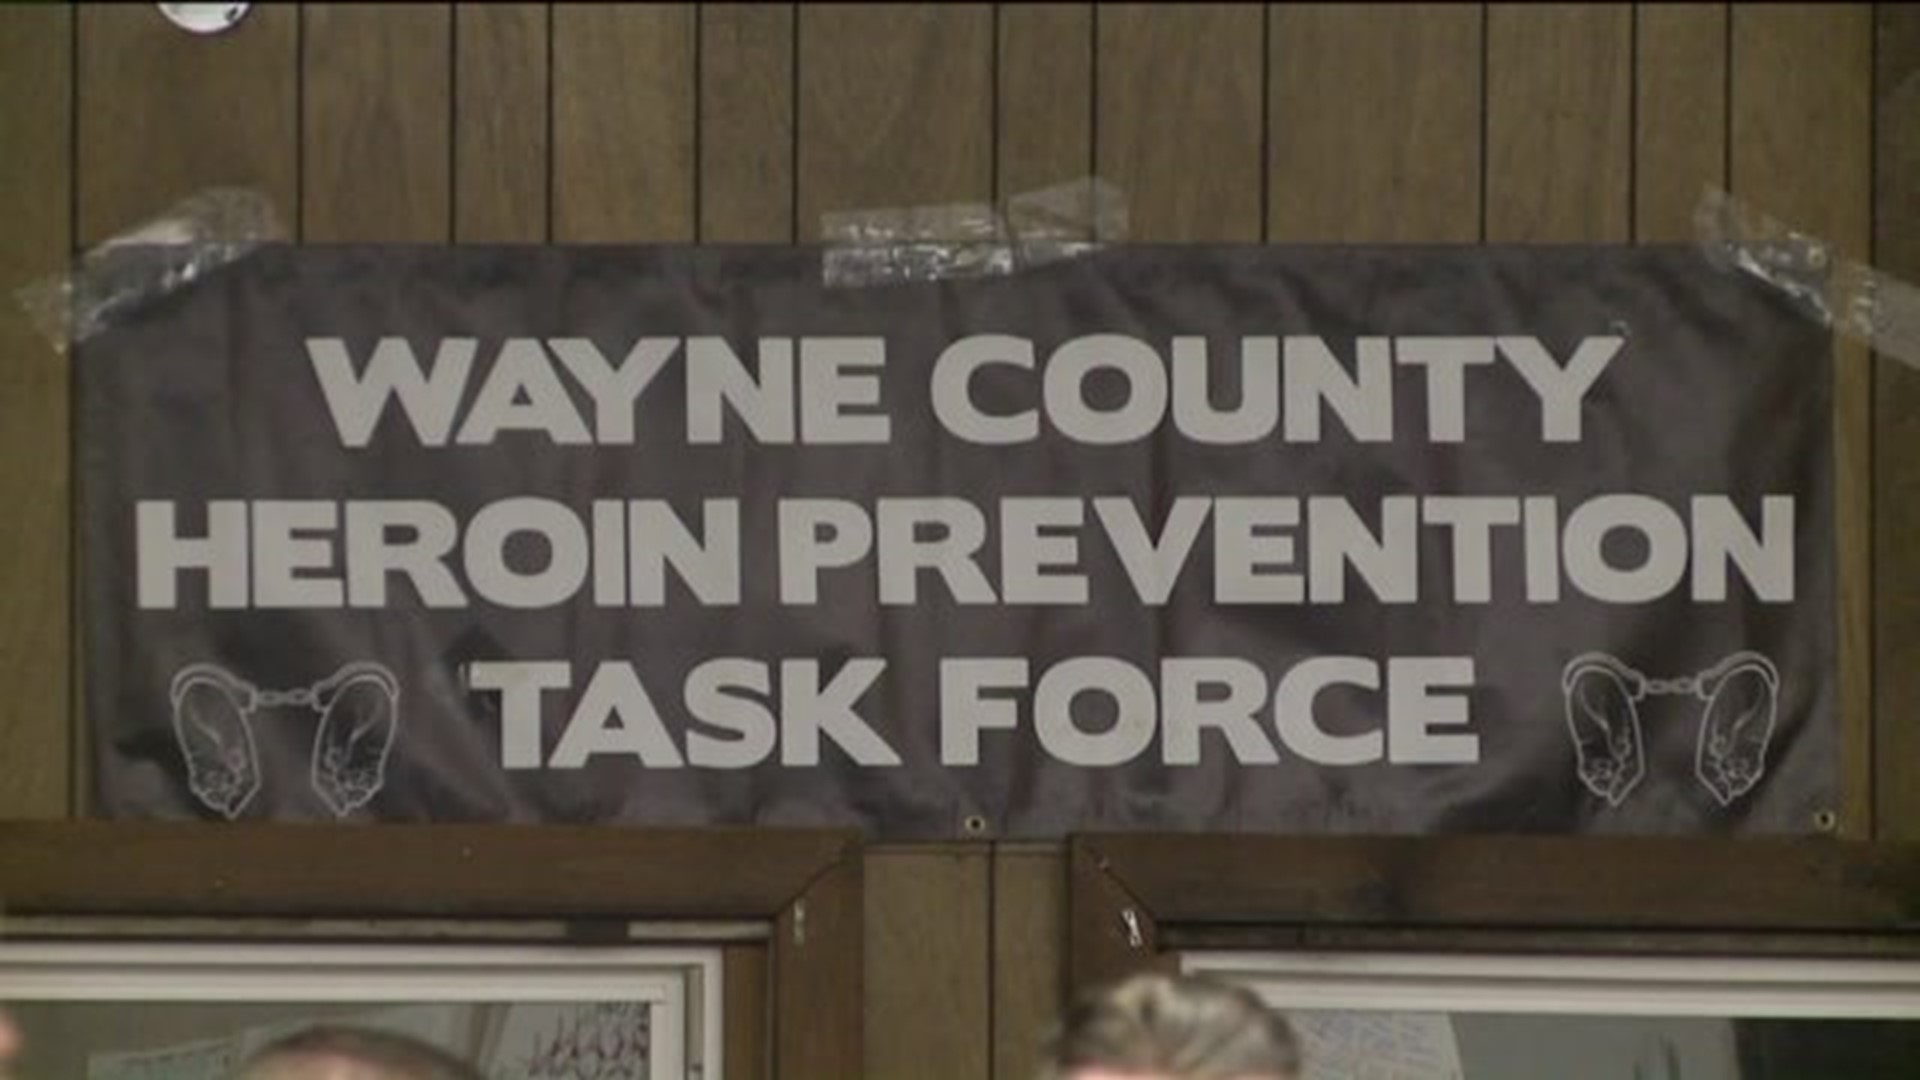 Fighting the Heroin Epidemic in Wayne County